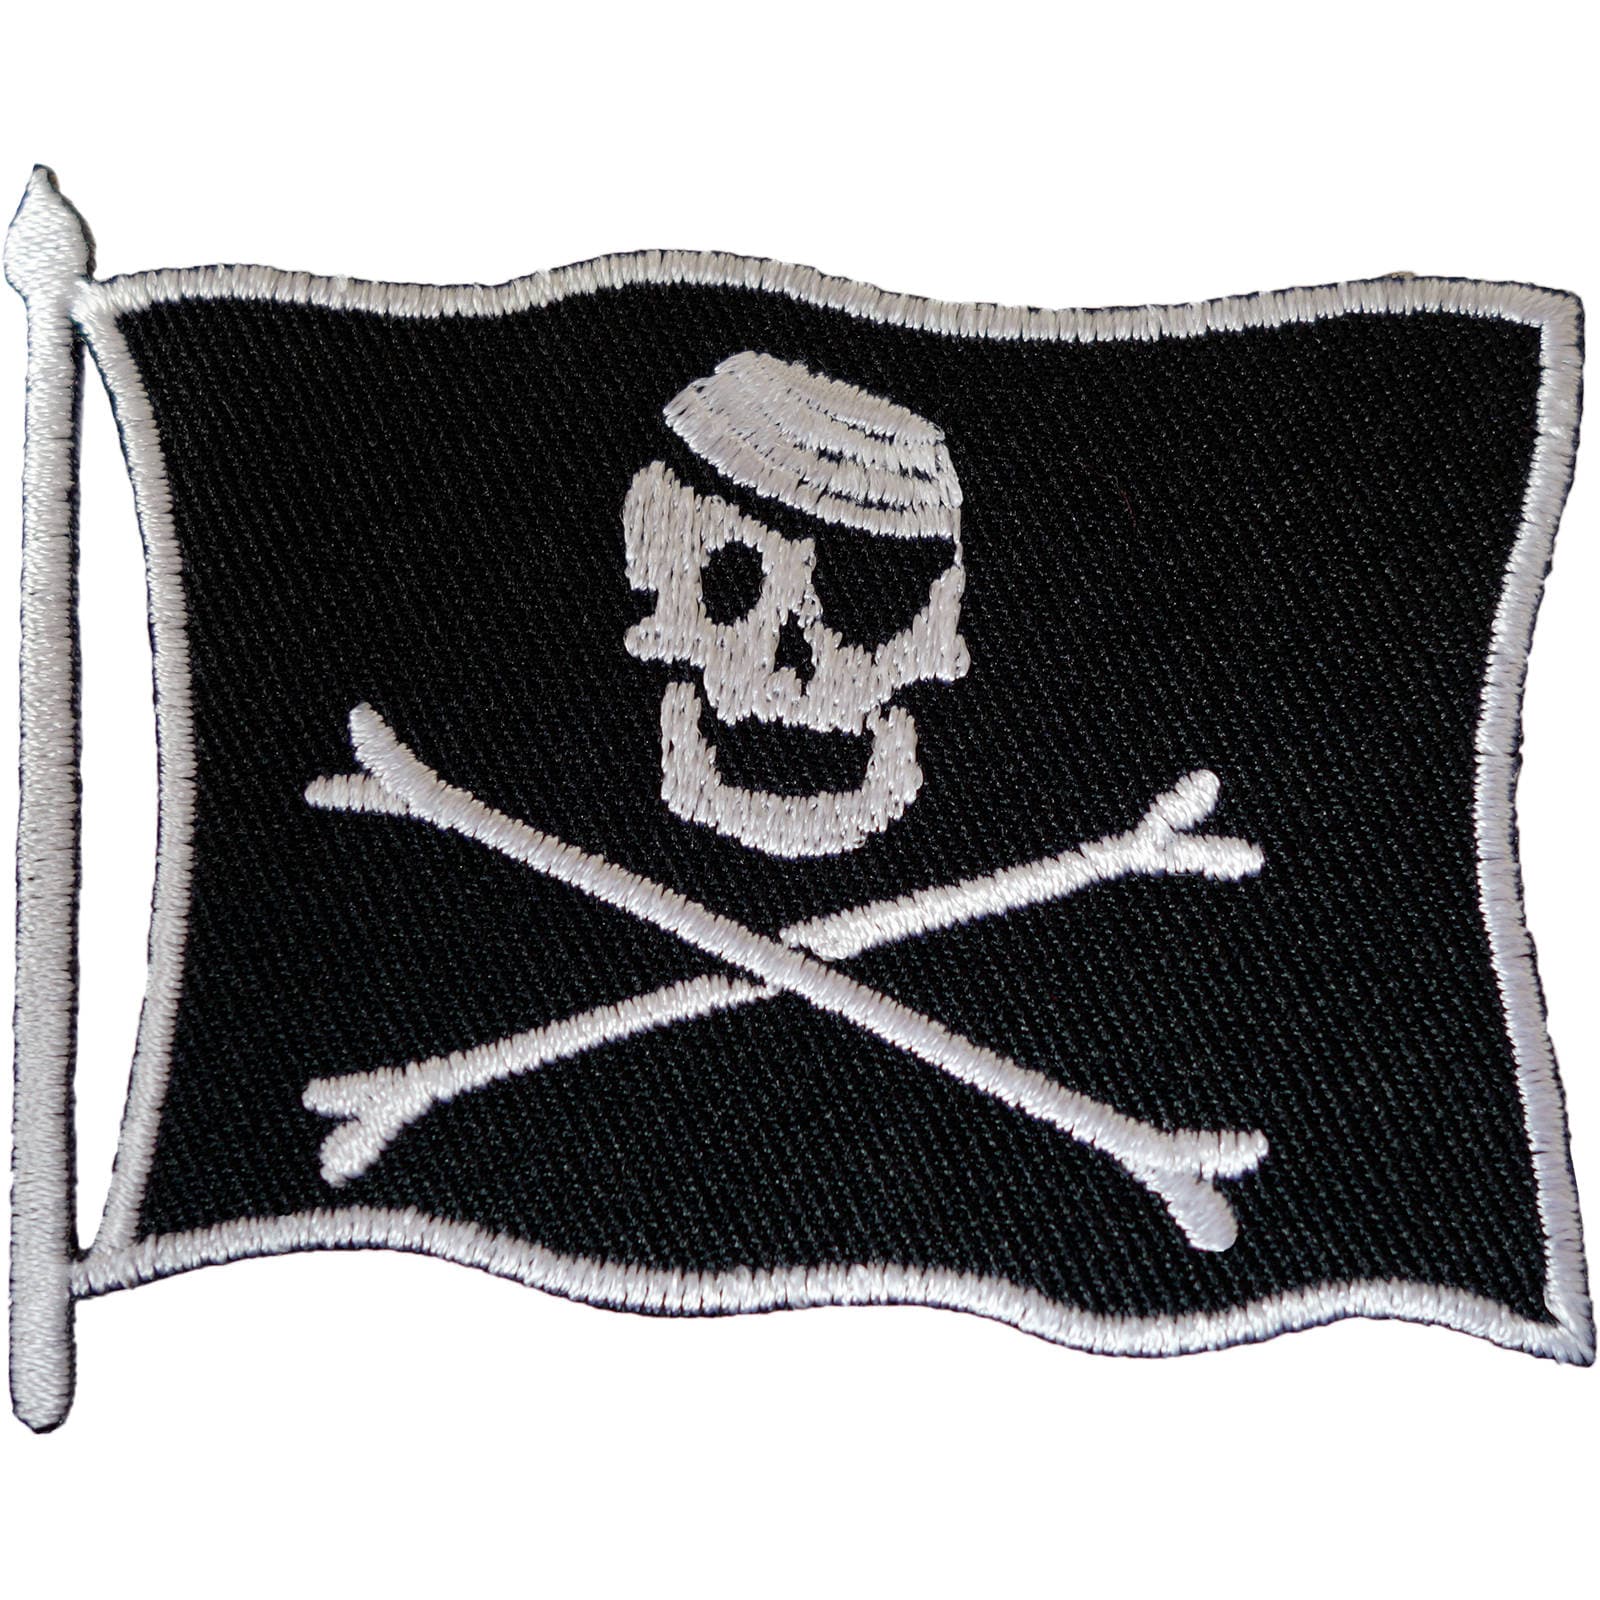 Embroidered Iron On Pirate Ship Patch Sew On Badge Jolly Roger Skull Crossbones 